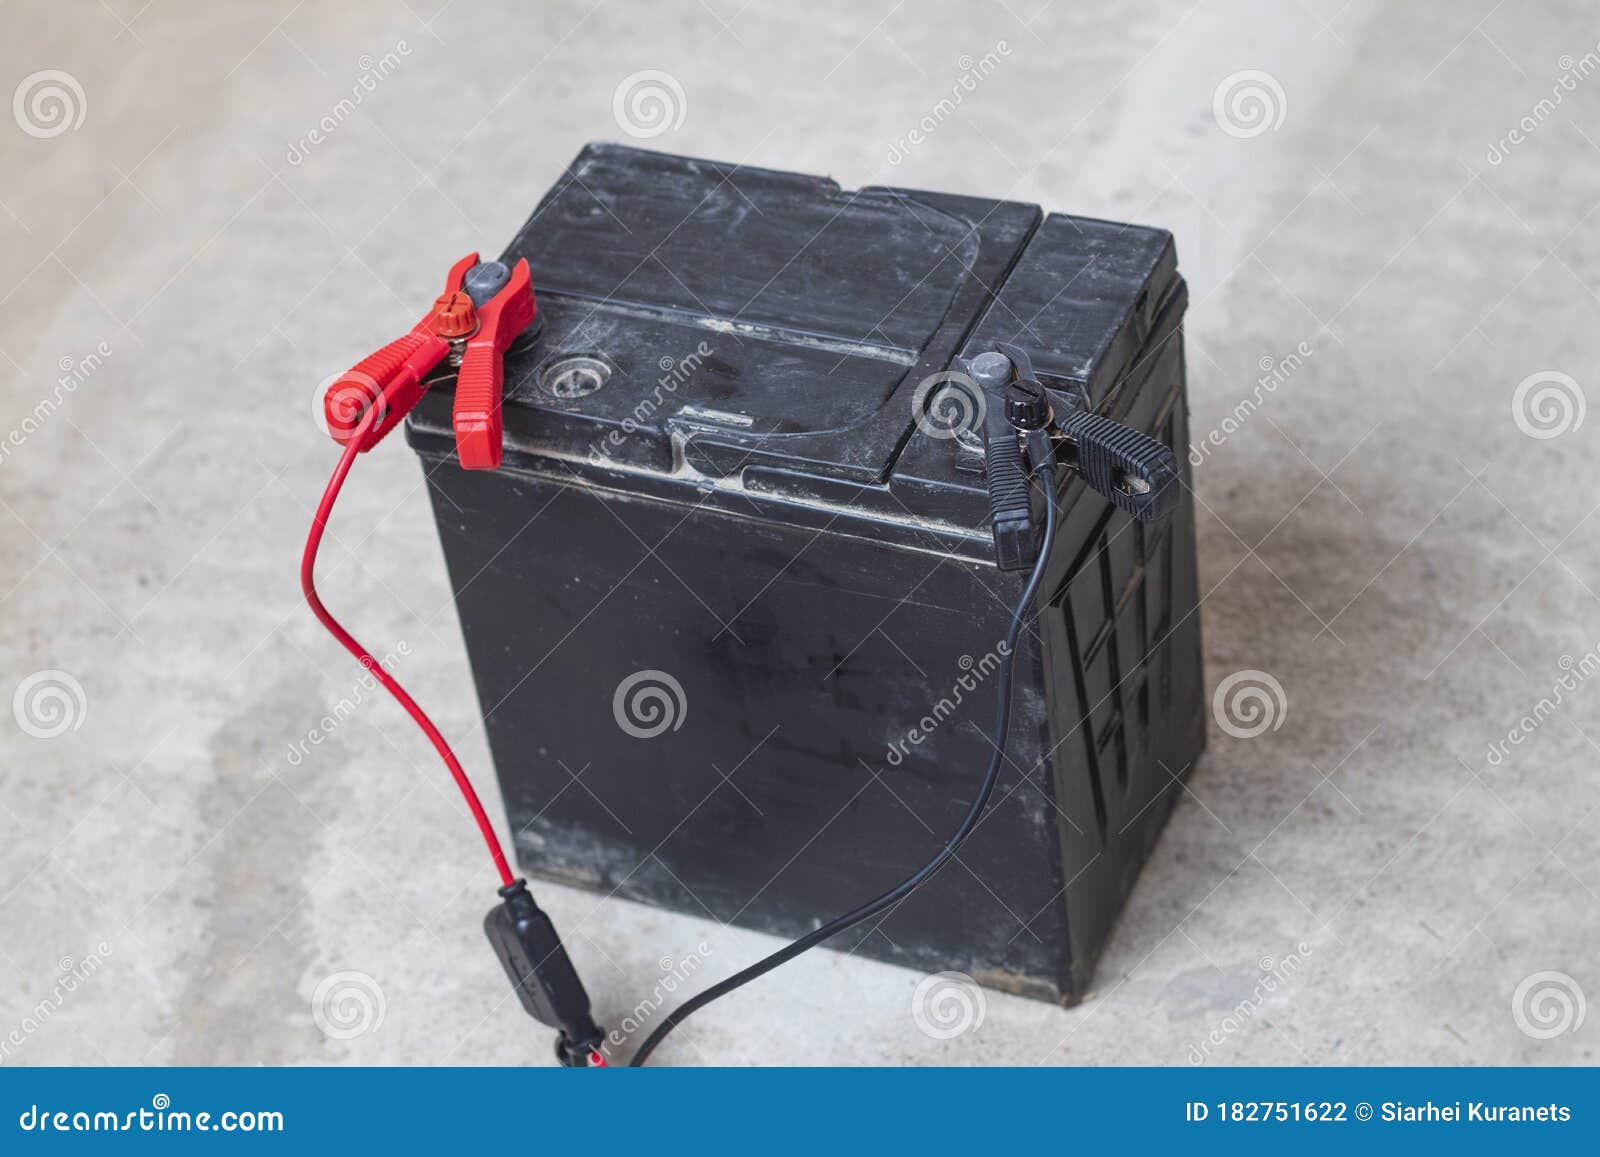 sektor spor fløjte On the Concrete Floor a Flock of Car Battery, the Master Puts Clips on the  Terminals for Recharging Stock Photo - Image of analyzing, care: 182751622